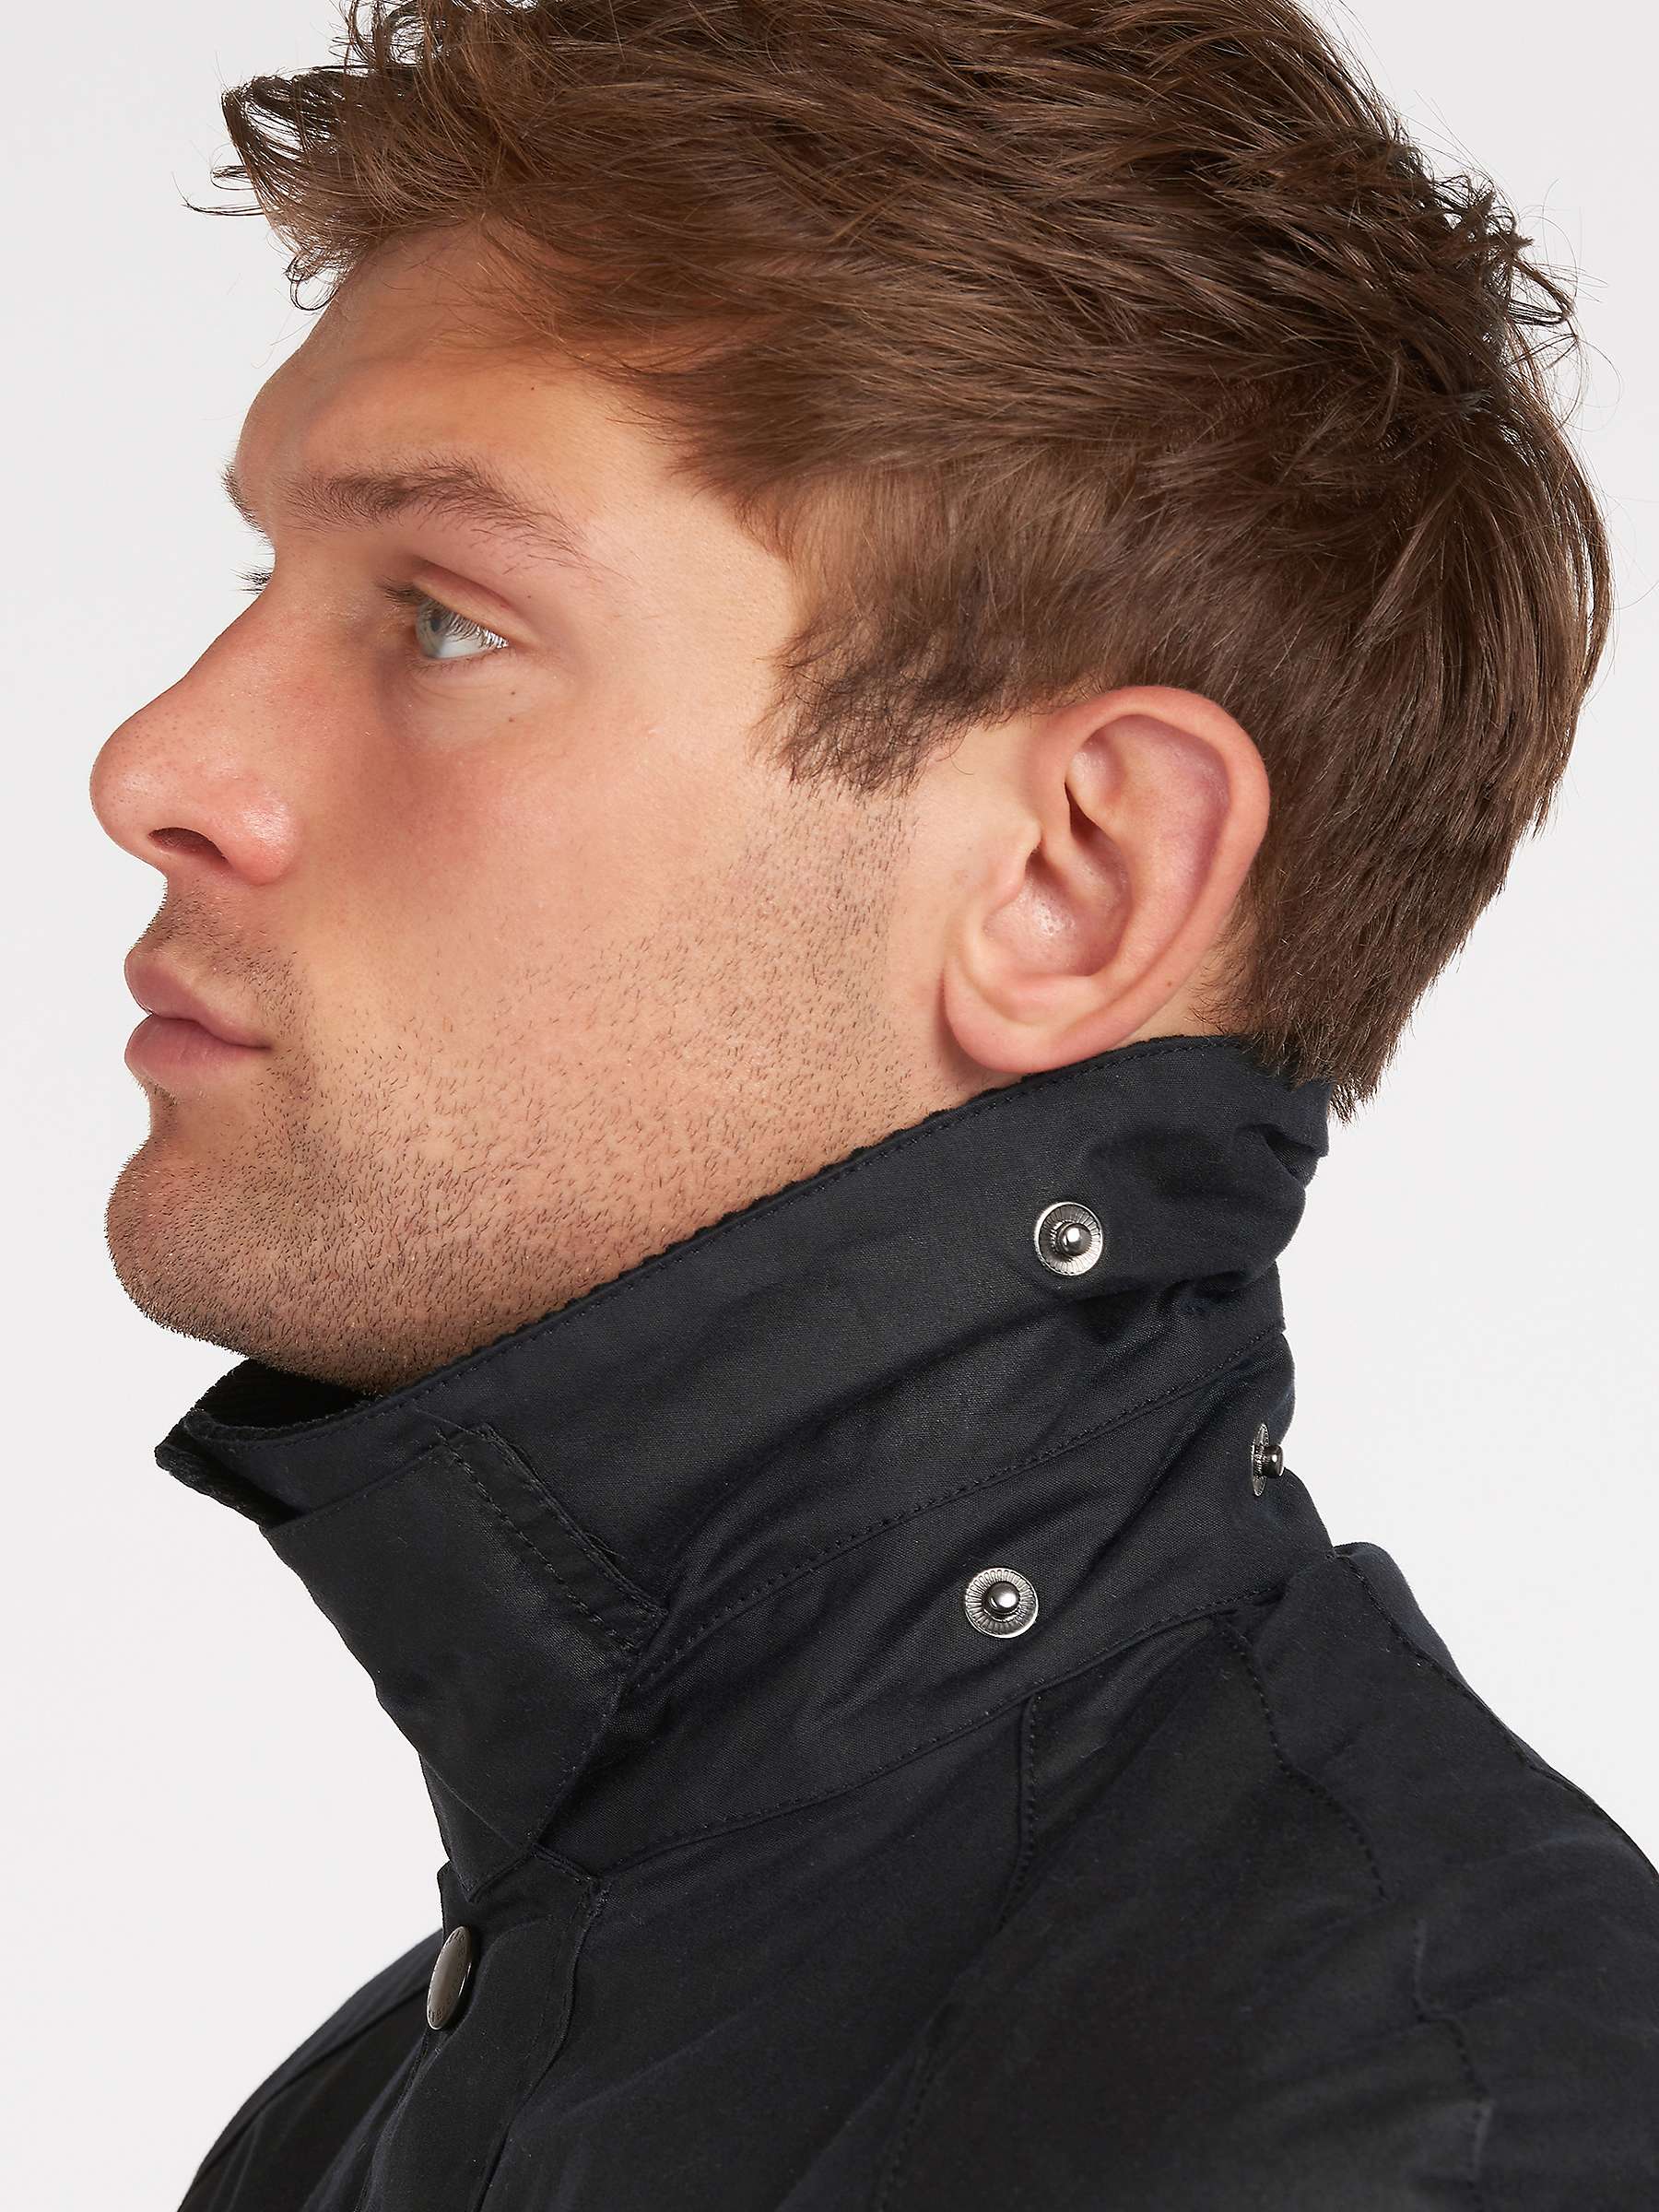 Buy Barbour Ashby Waxed Field Jacket Online at johnlewis.com